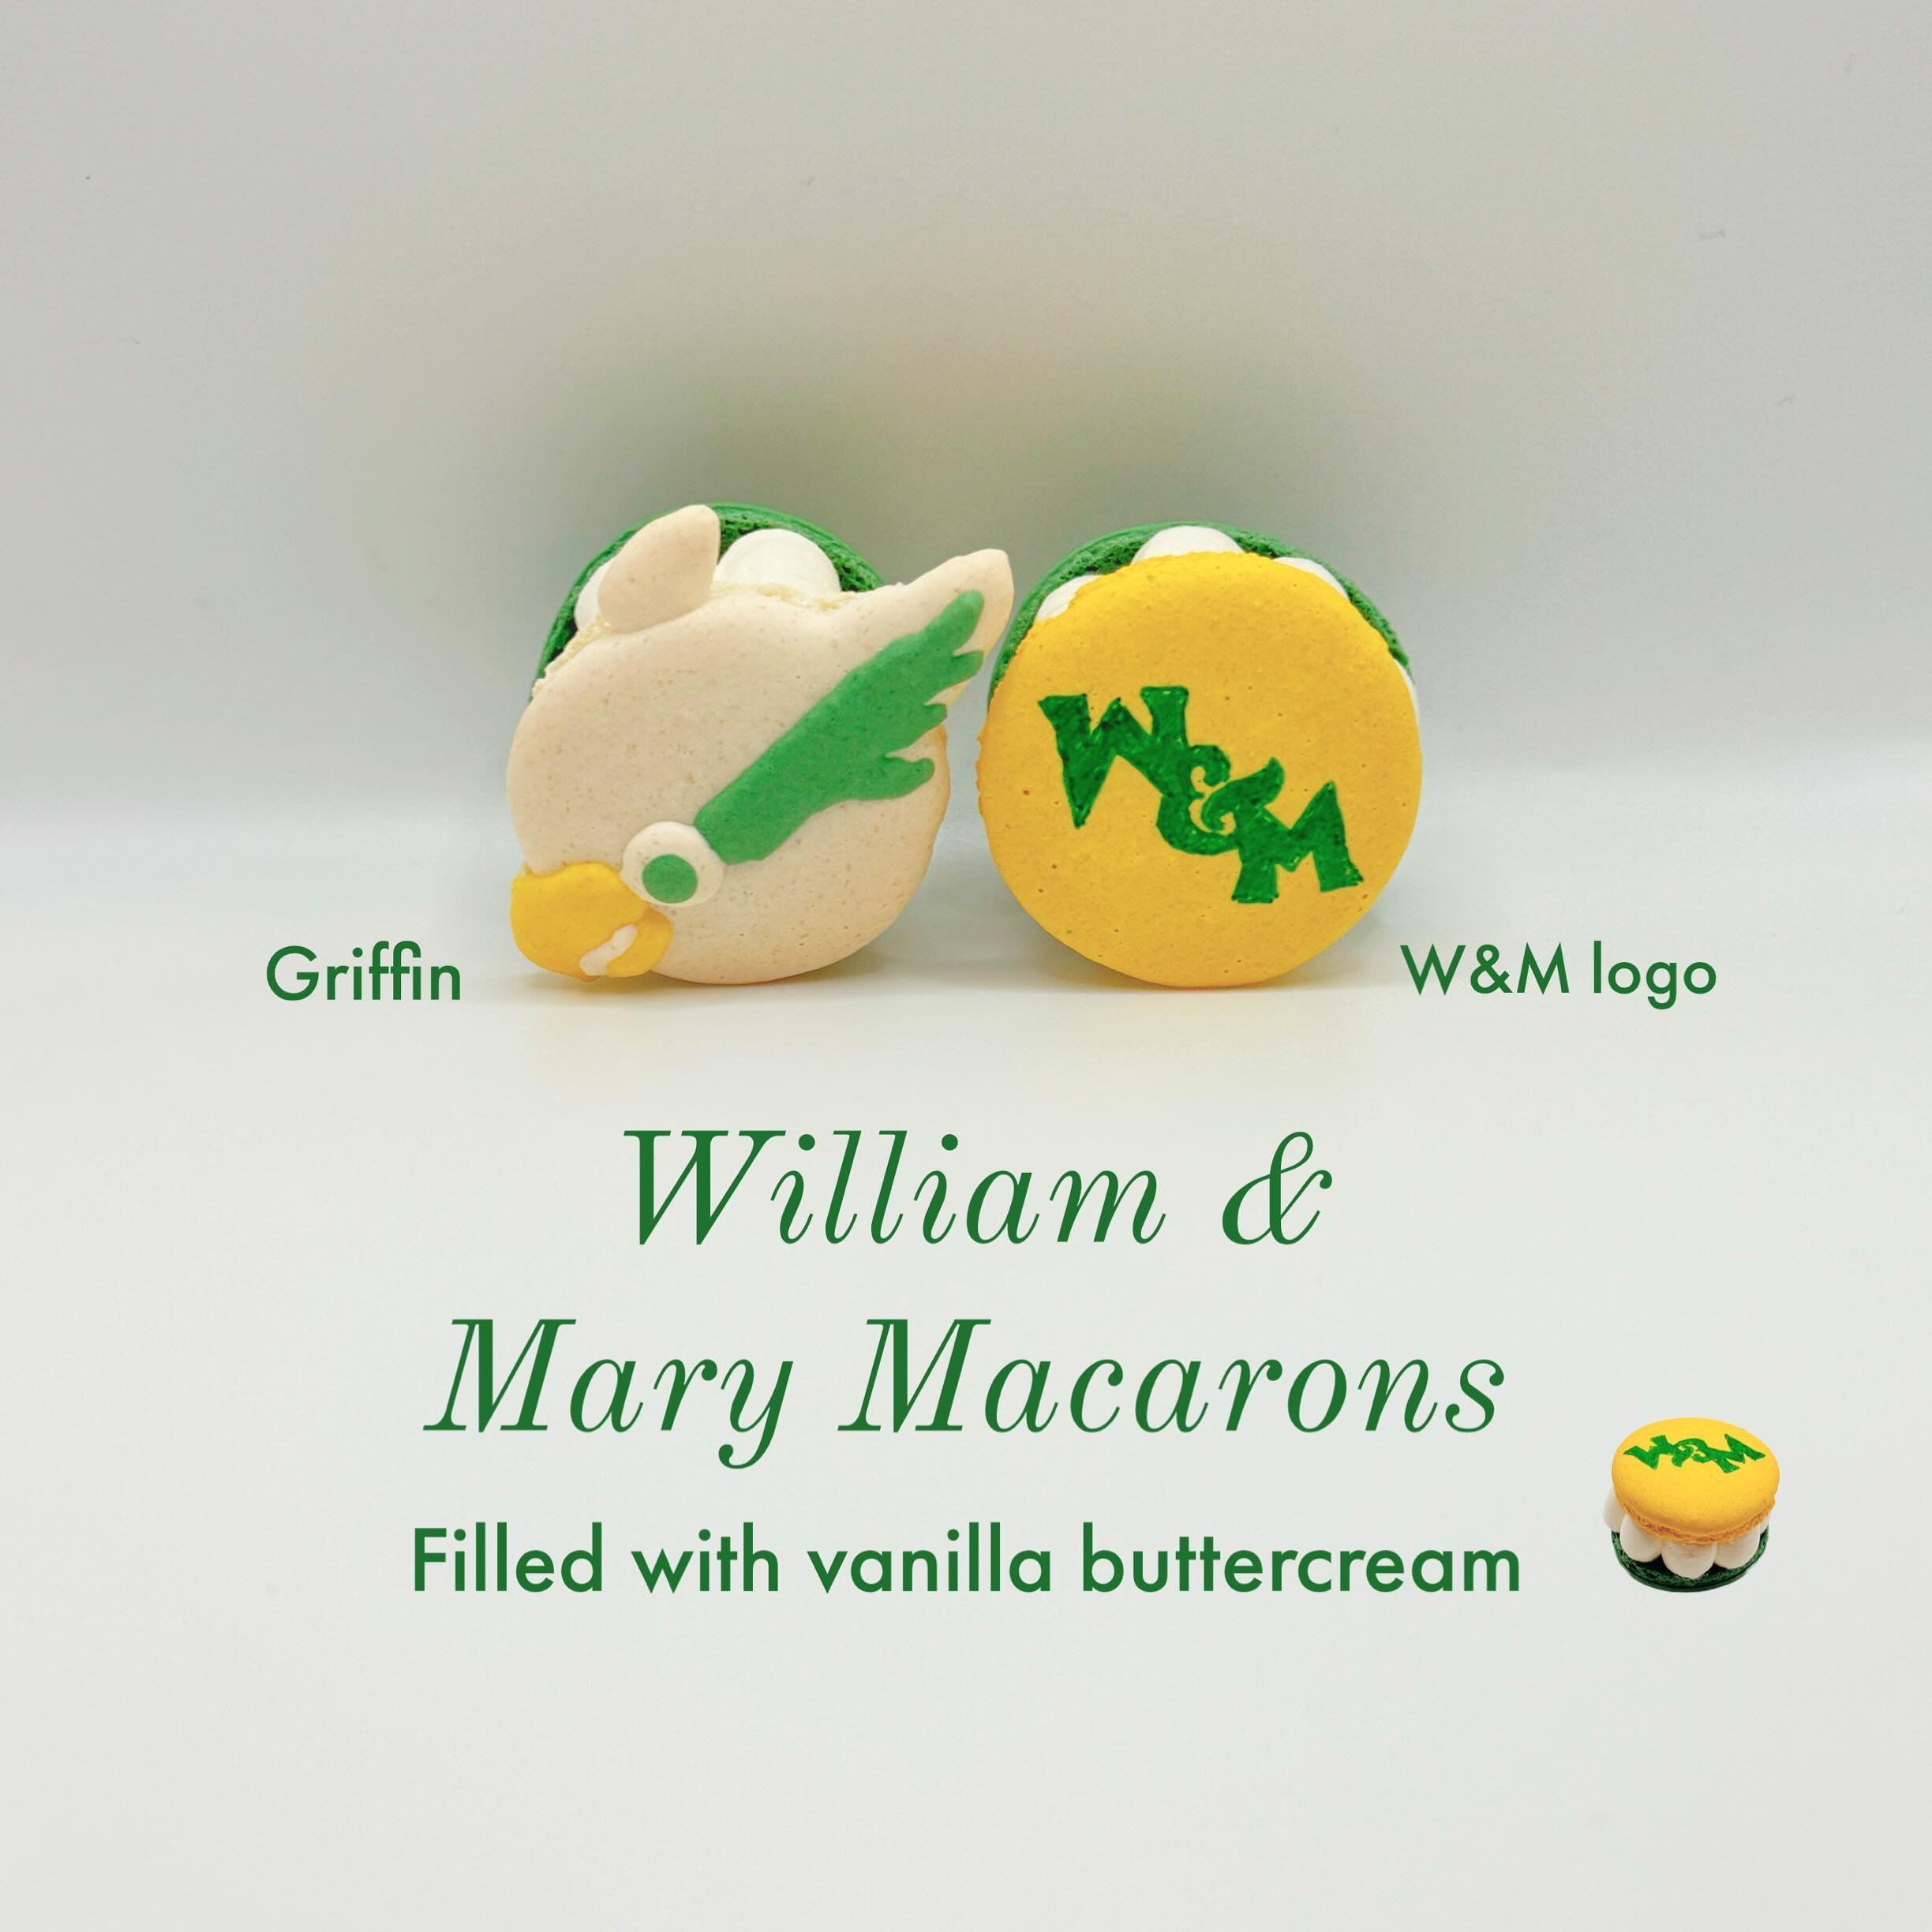 This is for all the William and Mary students! We are so grateful for your support ❤️ great job on completing the semester and have a wonderful summer break! #williamandmary #charactermacaron #griffinmacaron #oishiibakedgoods